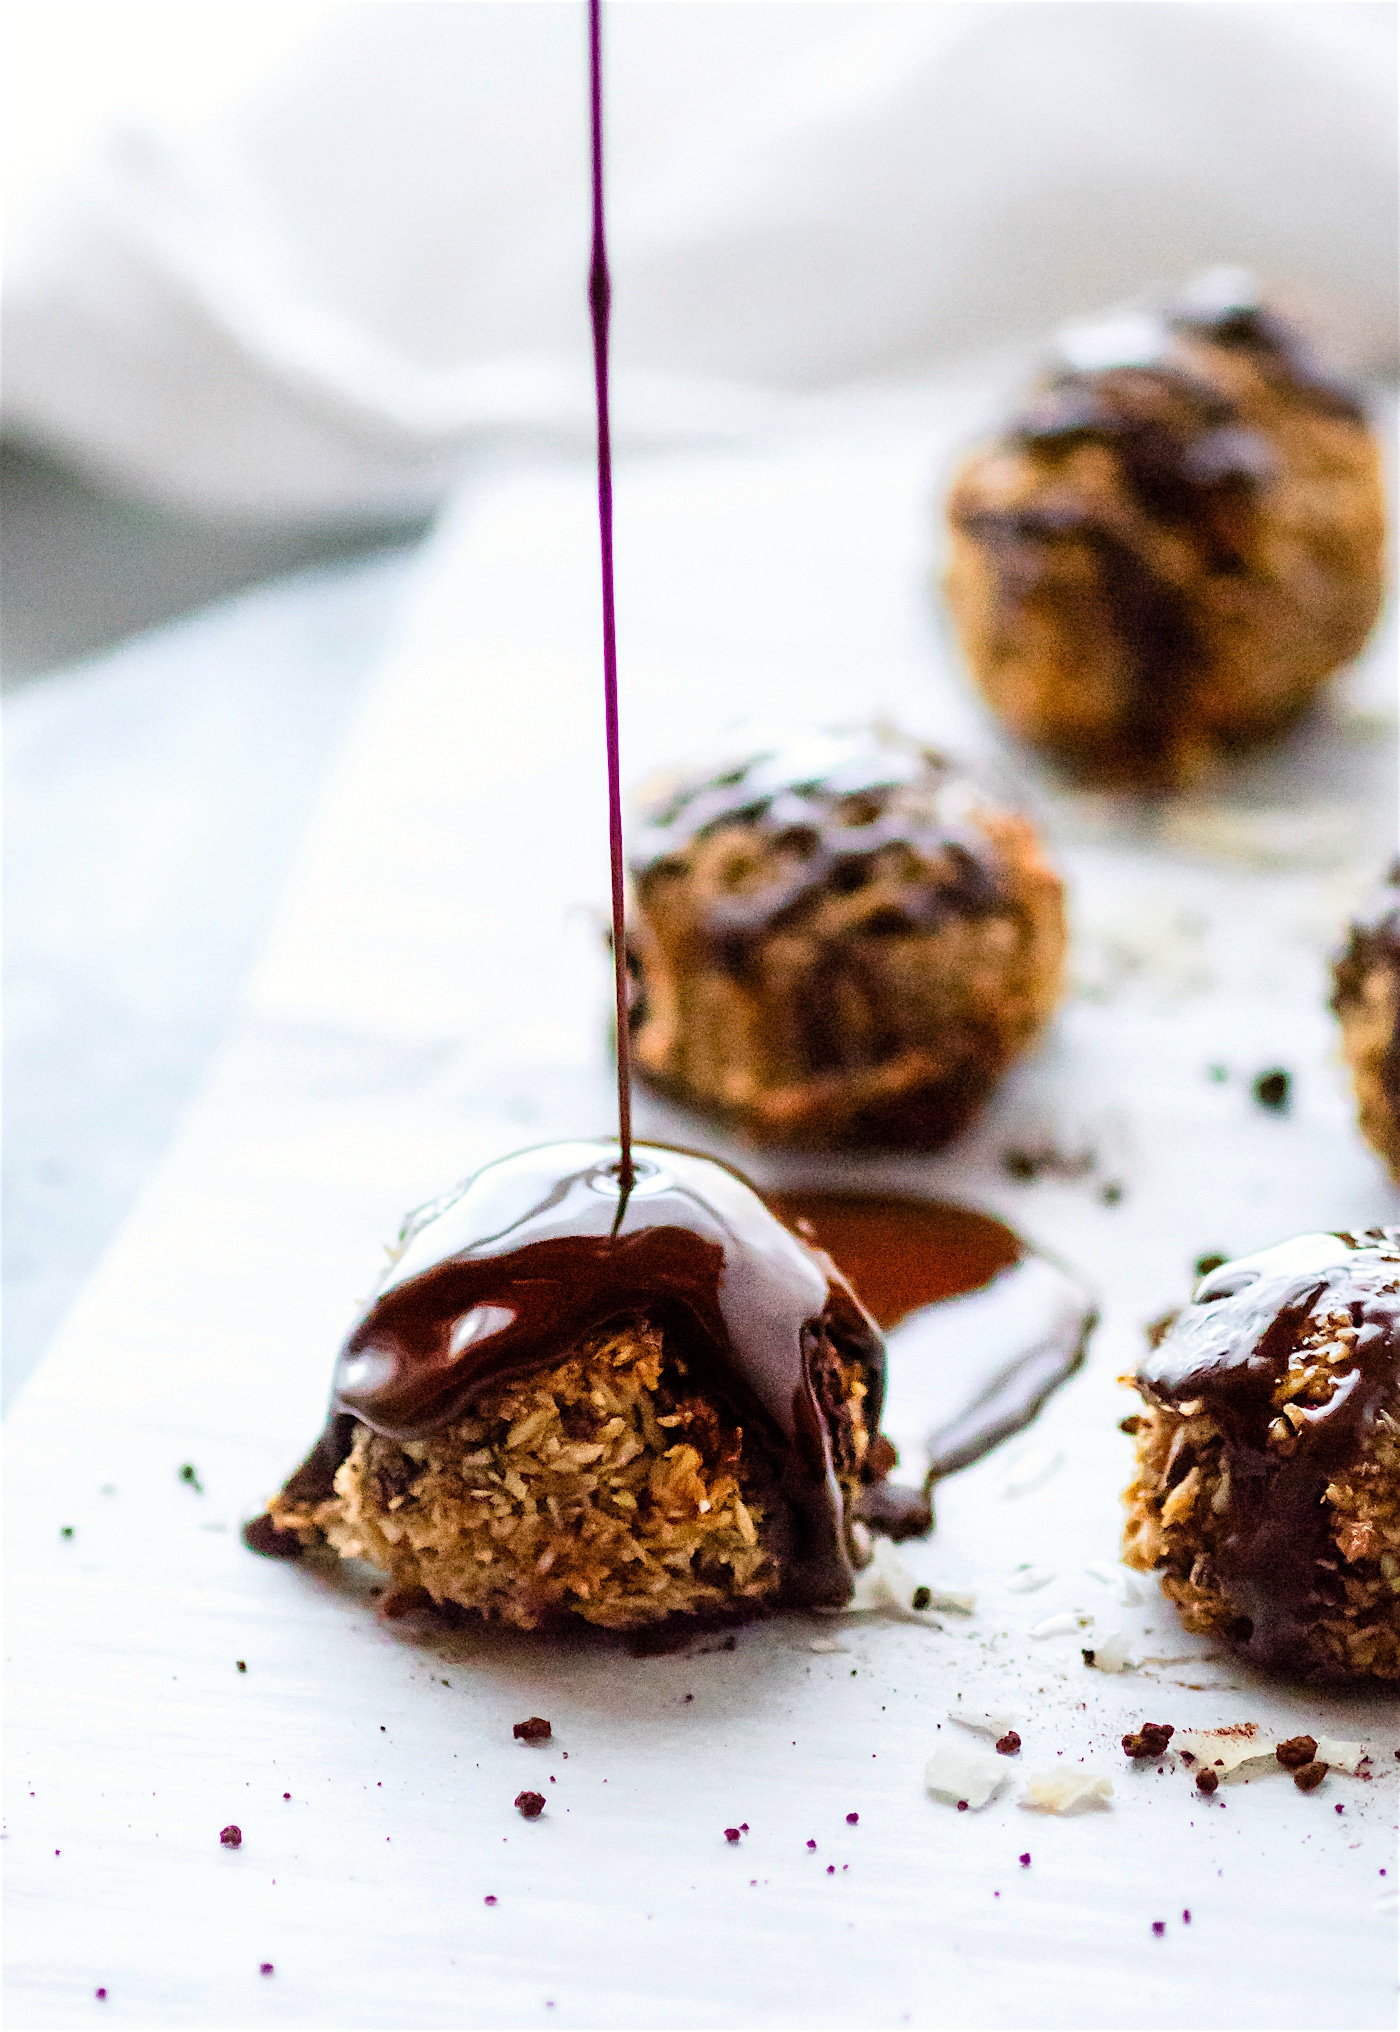 A thick drizzle of melted dark chocolate being poured over a coconut macaroon on a sheet of parchment paper